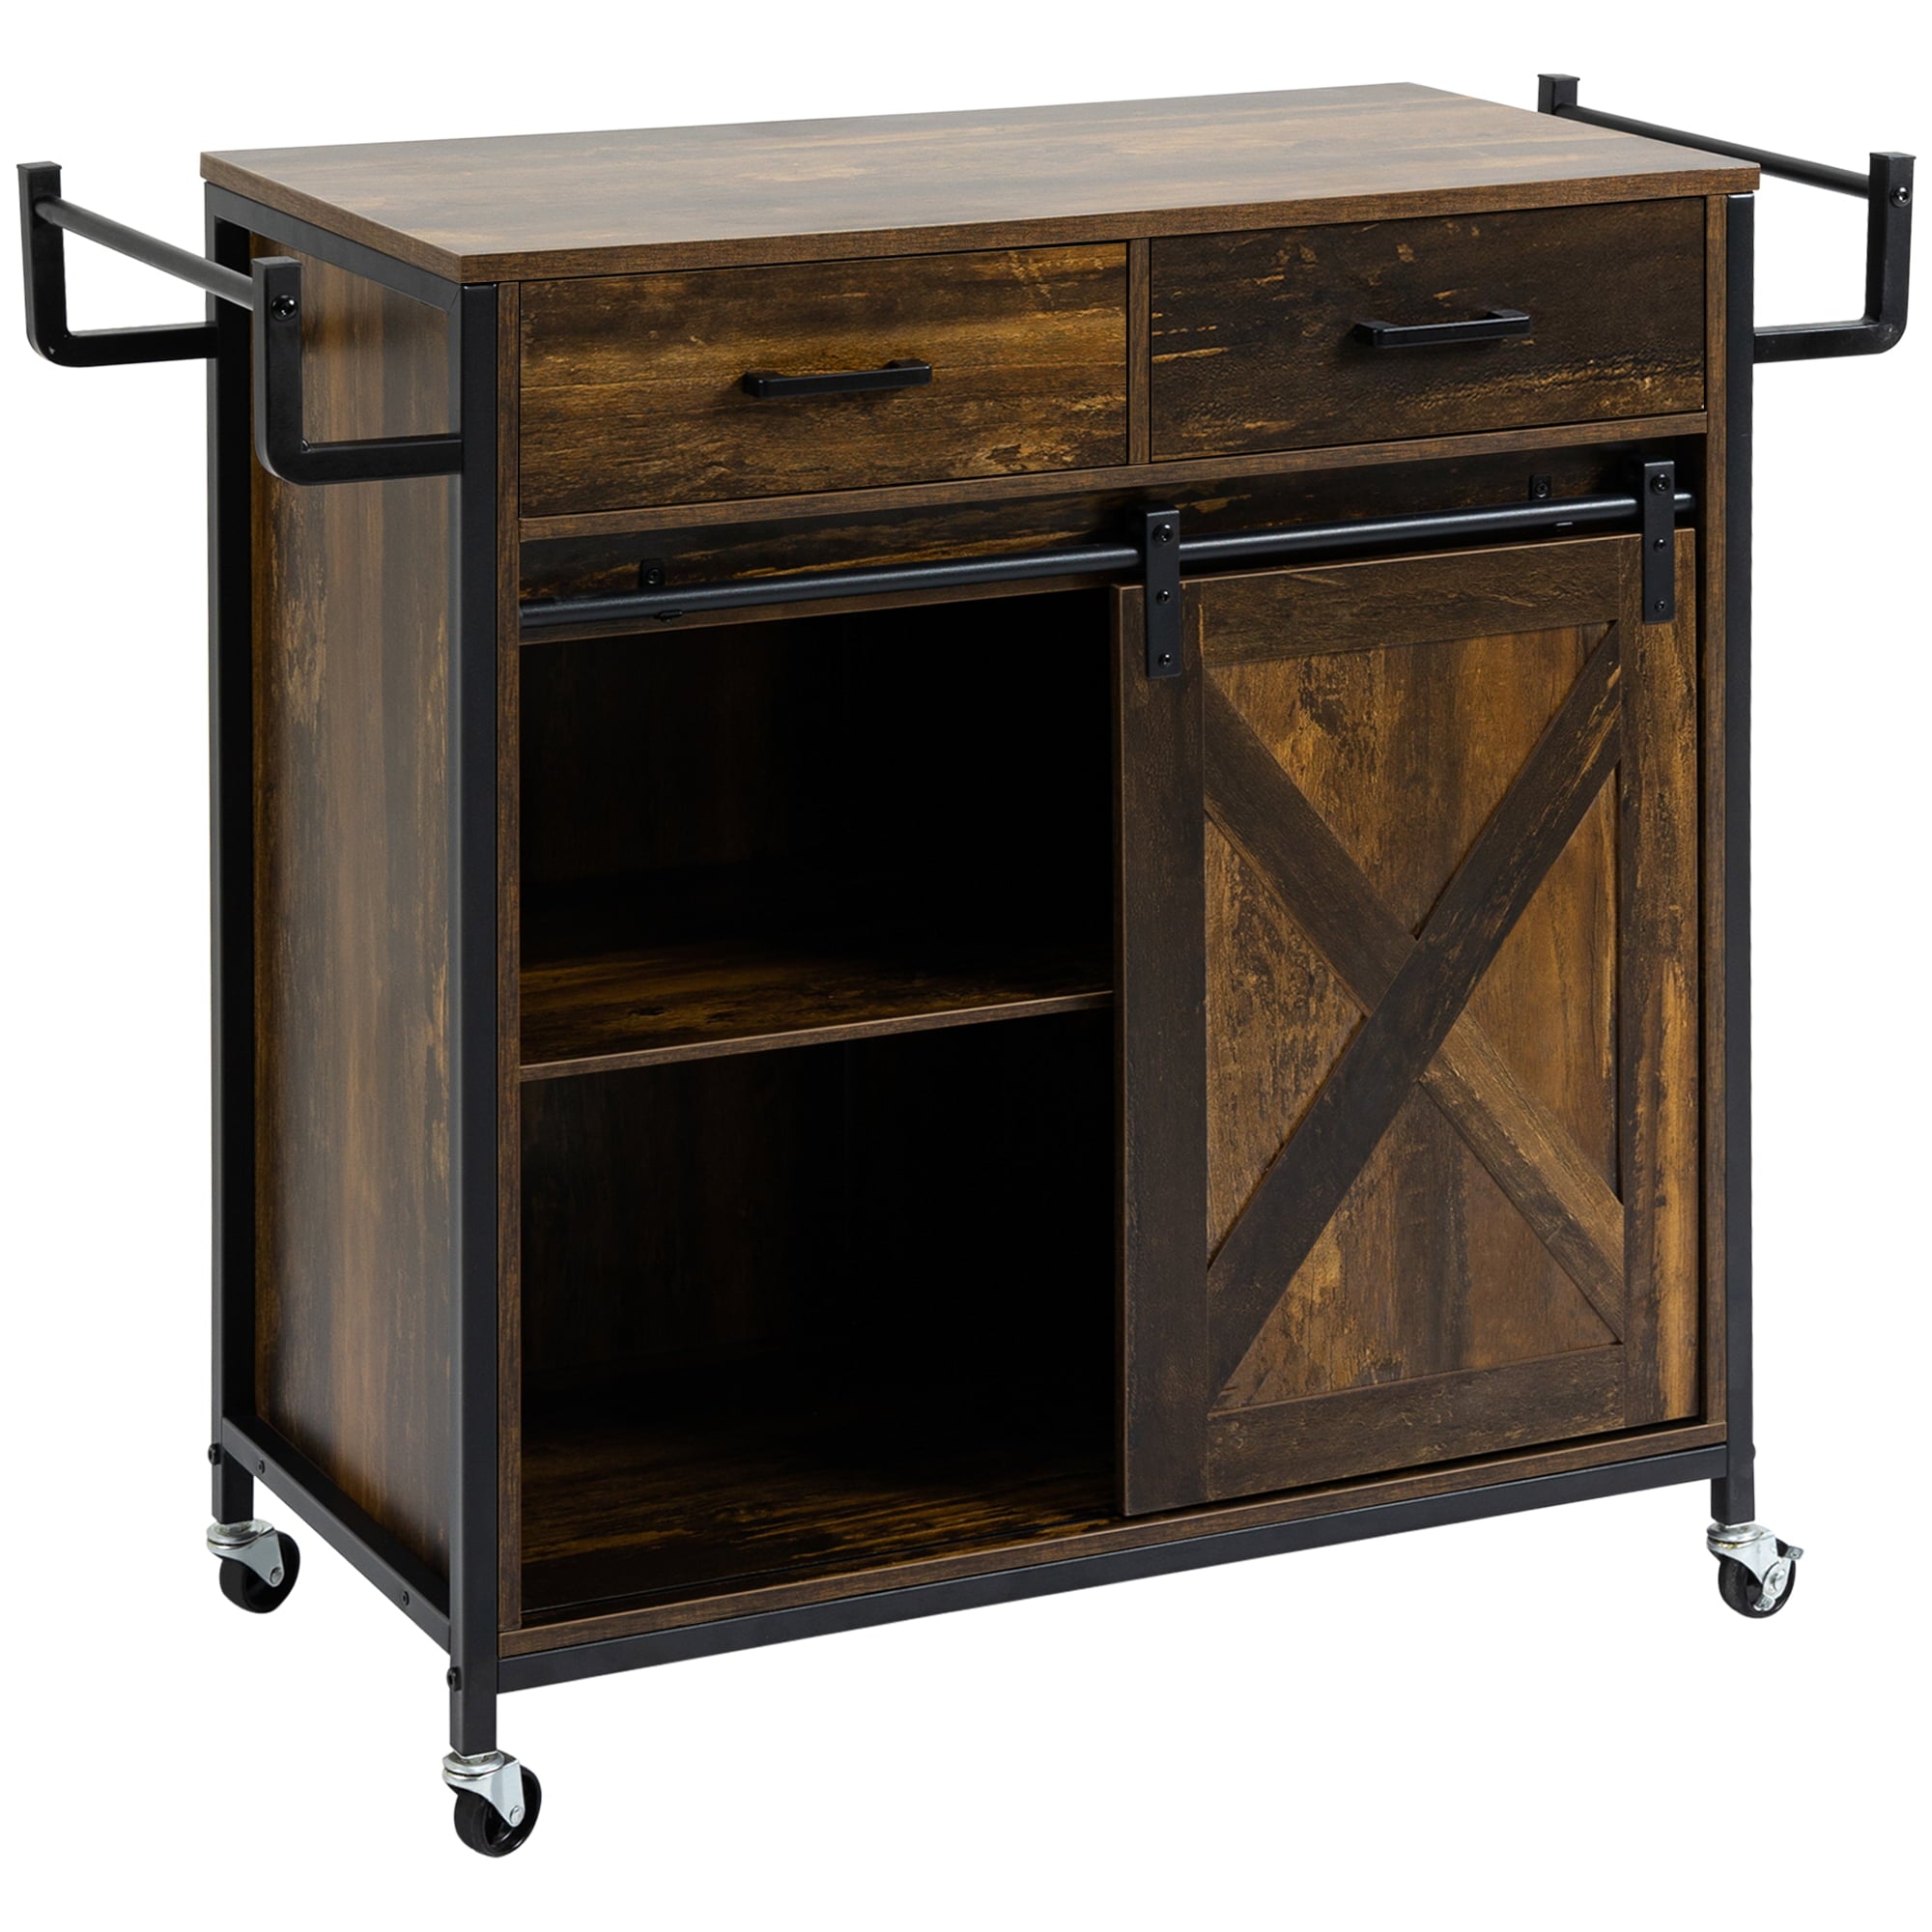 HOMCOM Rustic Farmhouse Kitchen Cart， Rolling Storage Island with Adjustable Shelf， Two Drawers， Sliding Barn Door Cabinet and Towel Rack， Rustic Brown